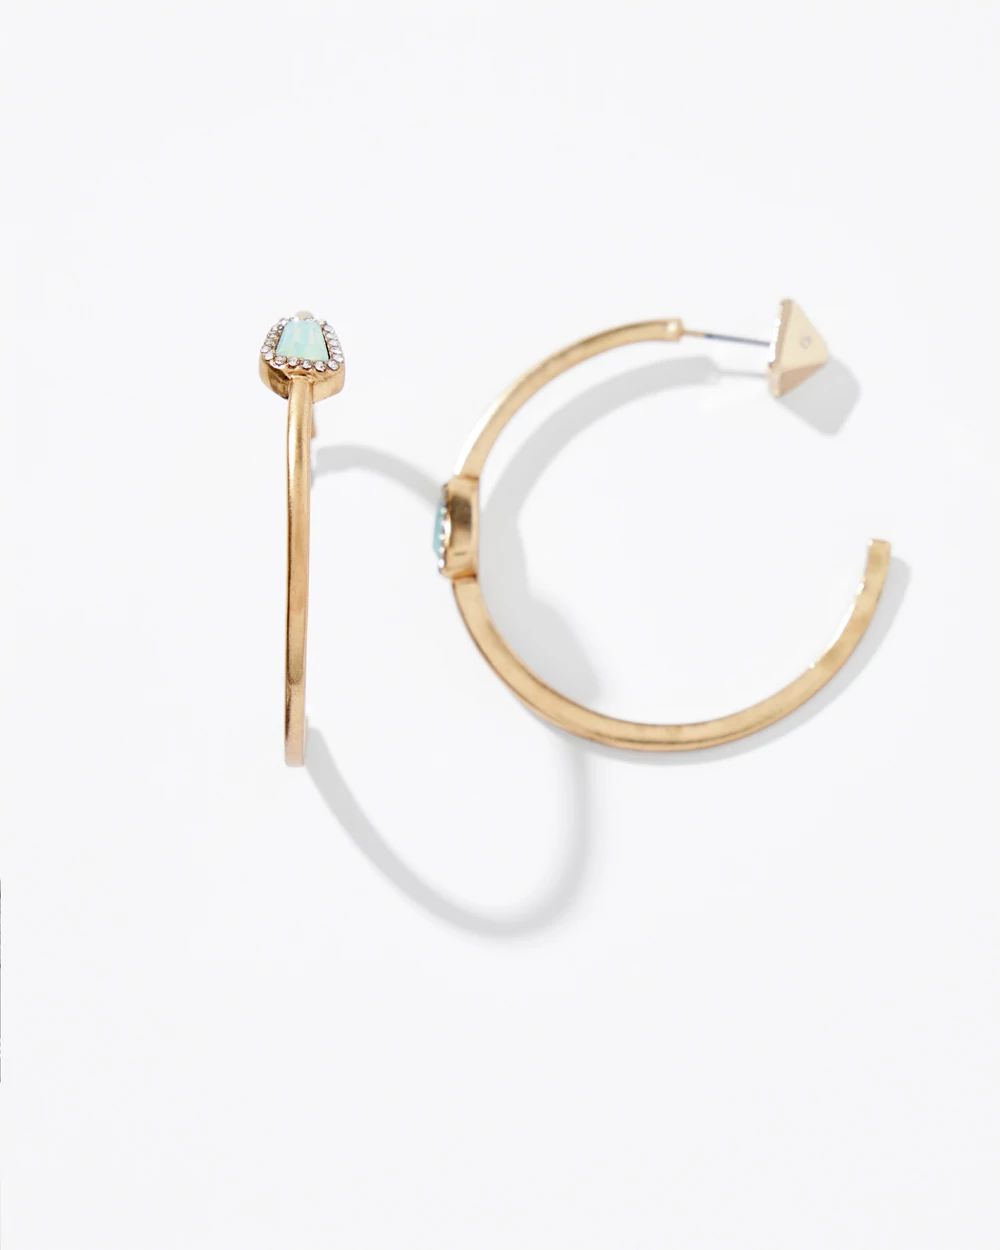 Gold Pave Stone Hoop Earrings click to view larger image.